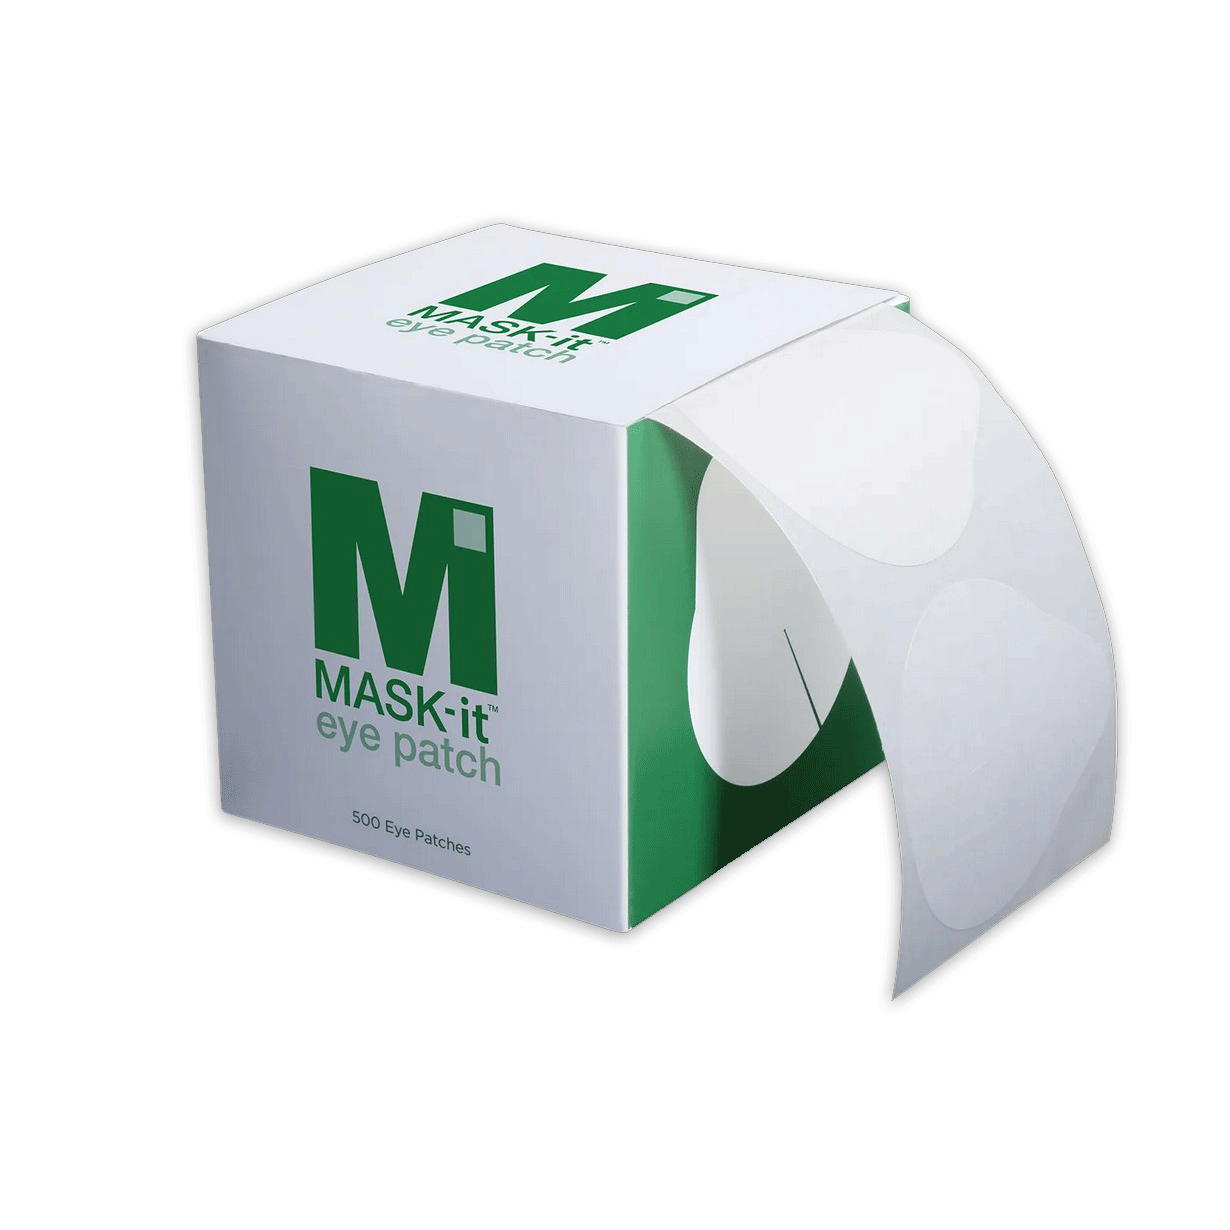 MASK-it™ Eye Patch: Disposable Eye Patches - Roll of 250 or 500 (As low as $0.30/patch)